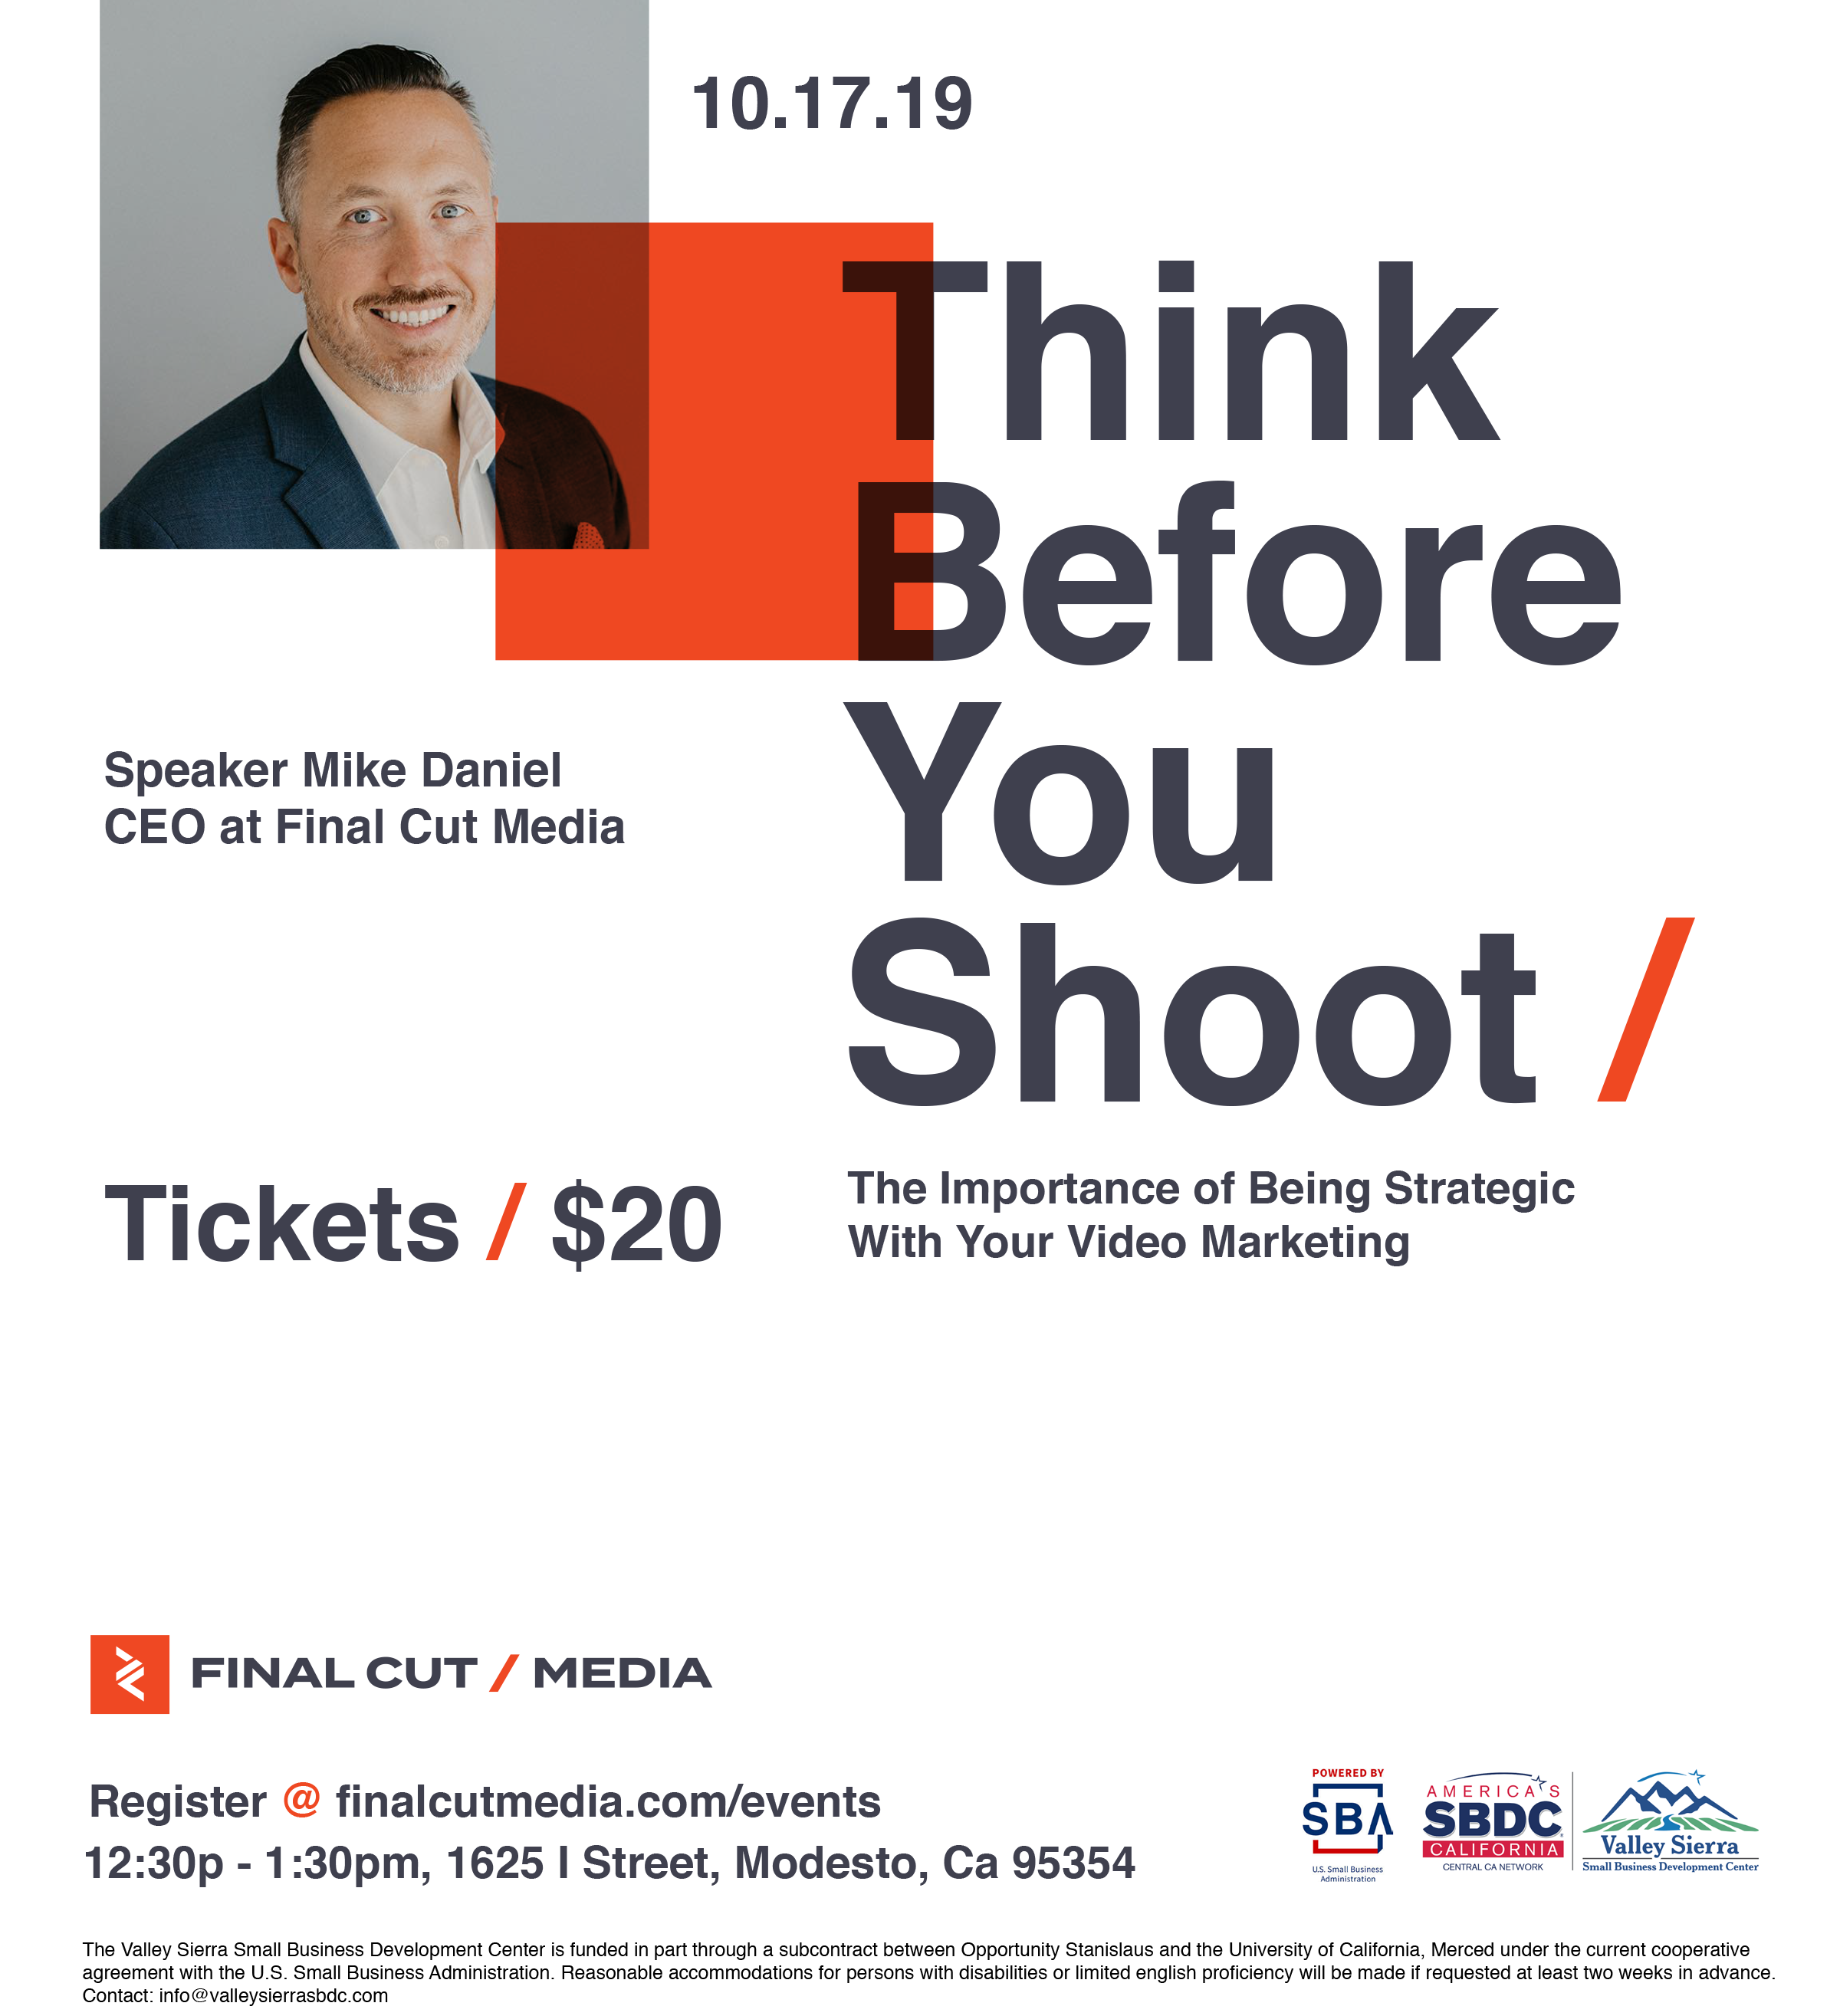 Event Flyer, Think Before You Shoot. Tickets $20.00. 1625 I Street Modesto, Ca.